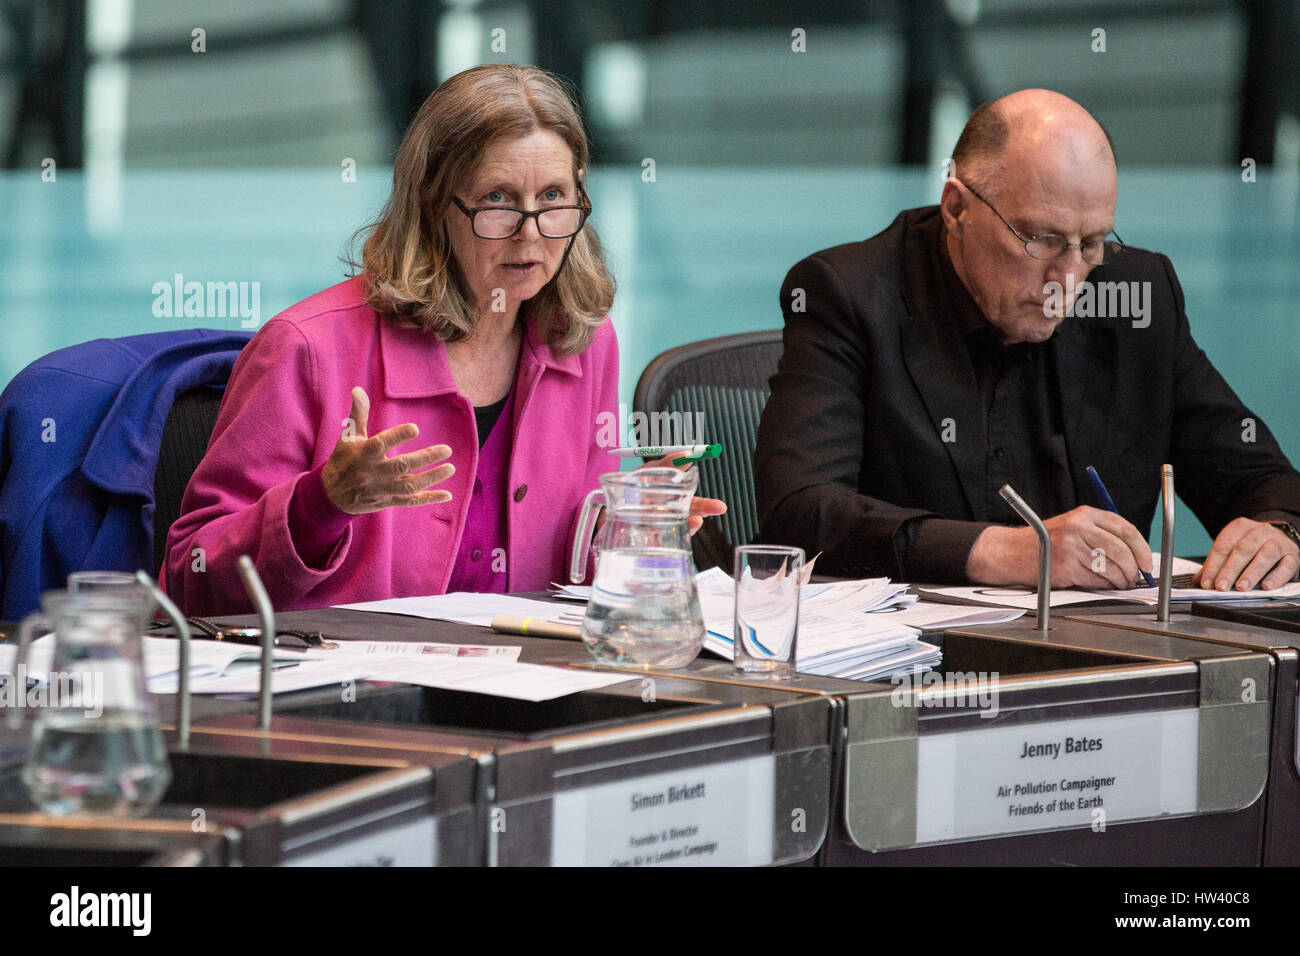 London, UK. 16th March, 2017. Jenny Bates, London Campaigner at Friends of the Earth, addresses the London Assembly Environment Committee during a debate on Heathrow expansion in the Chamber at City Hall. Credit: Mark Kerrison/Alamy Live News Stock Photo